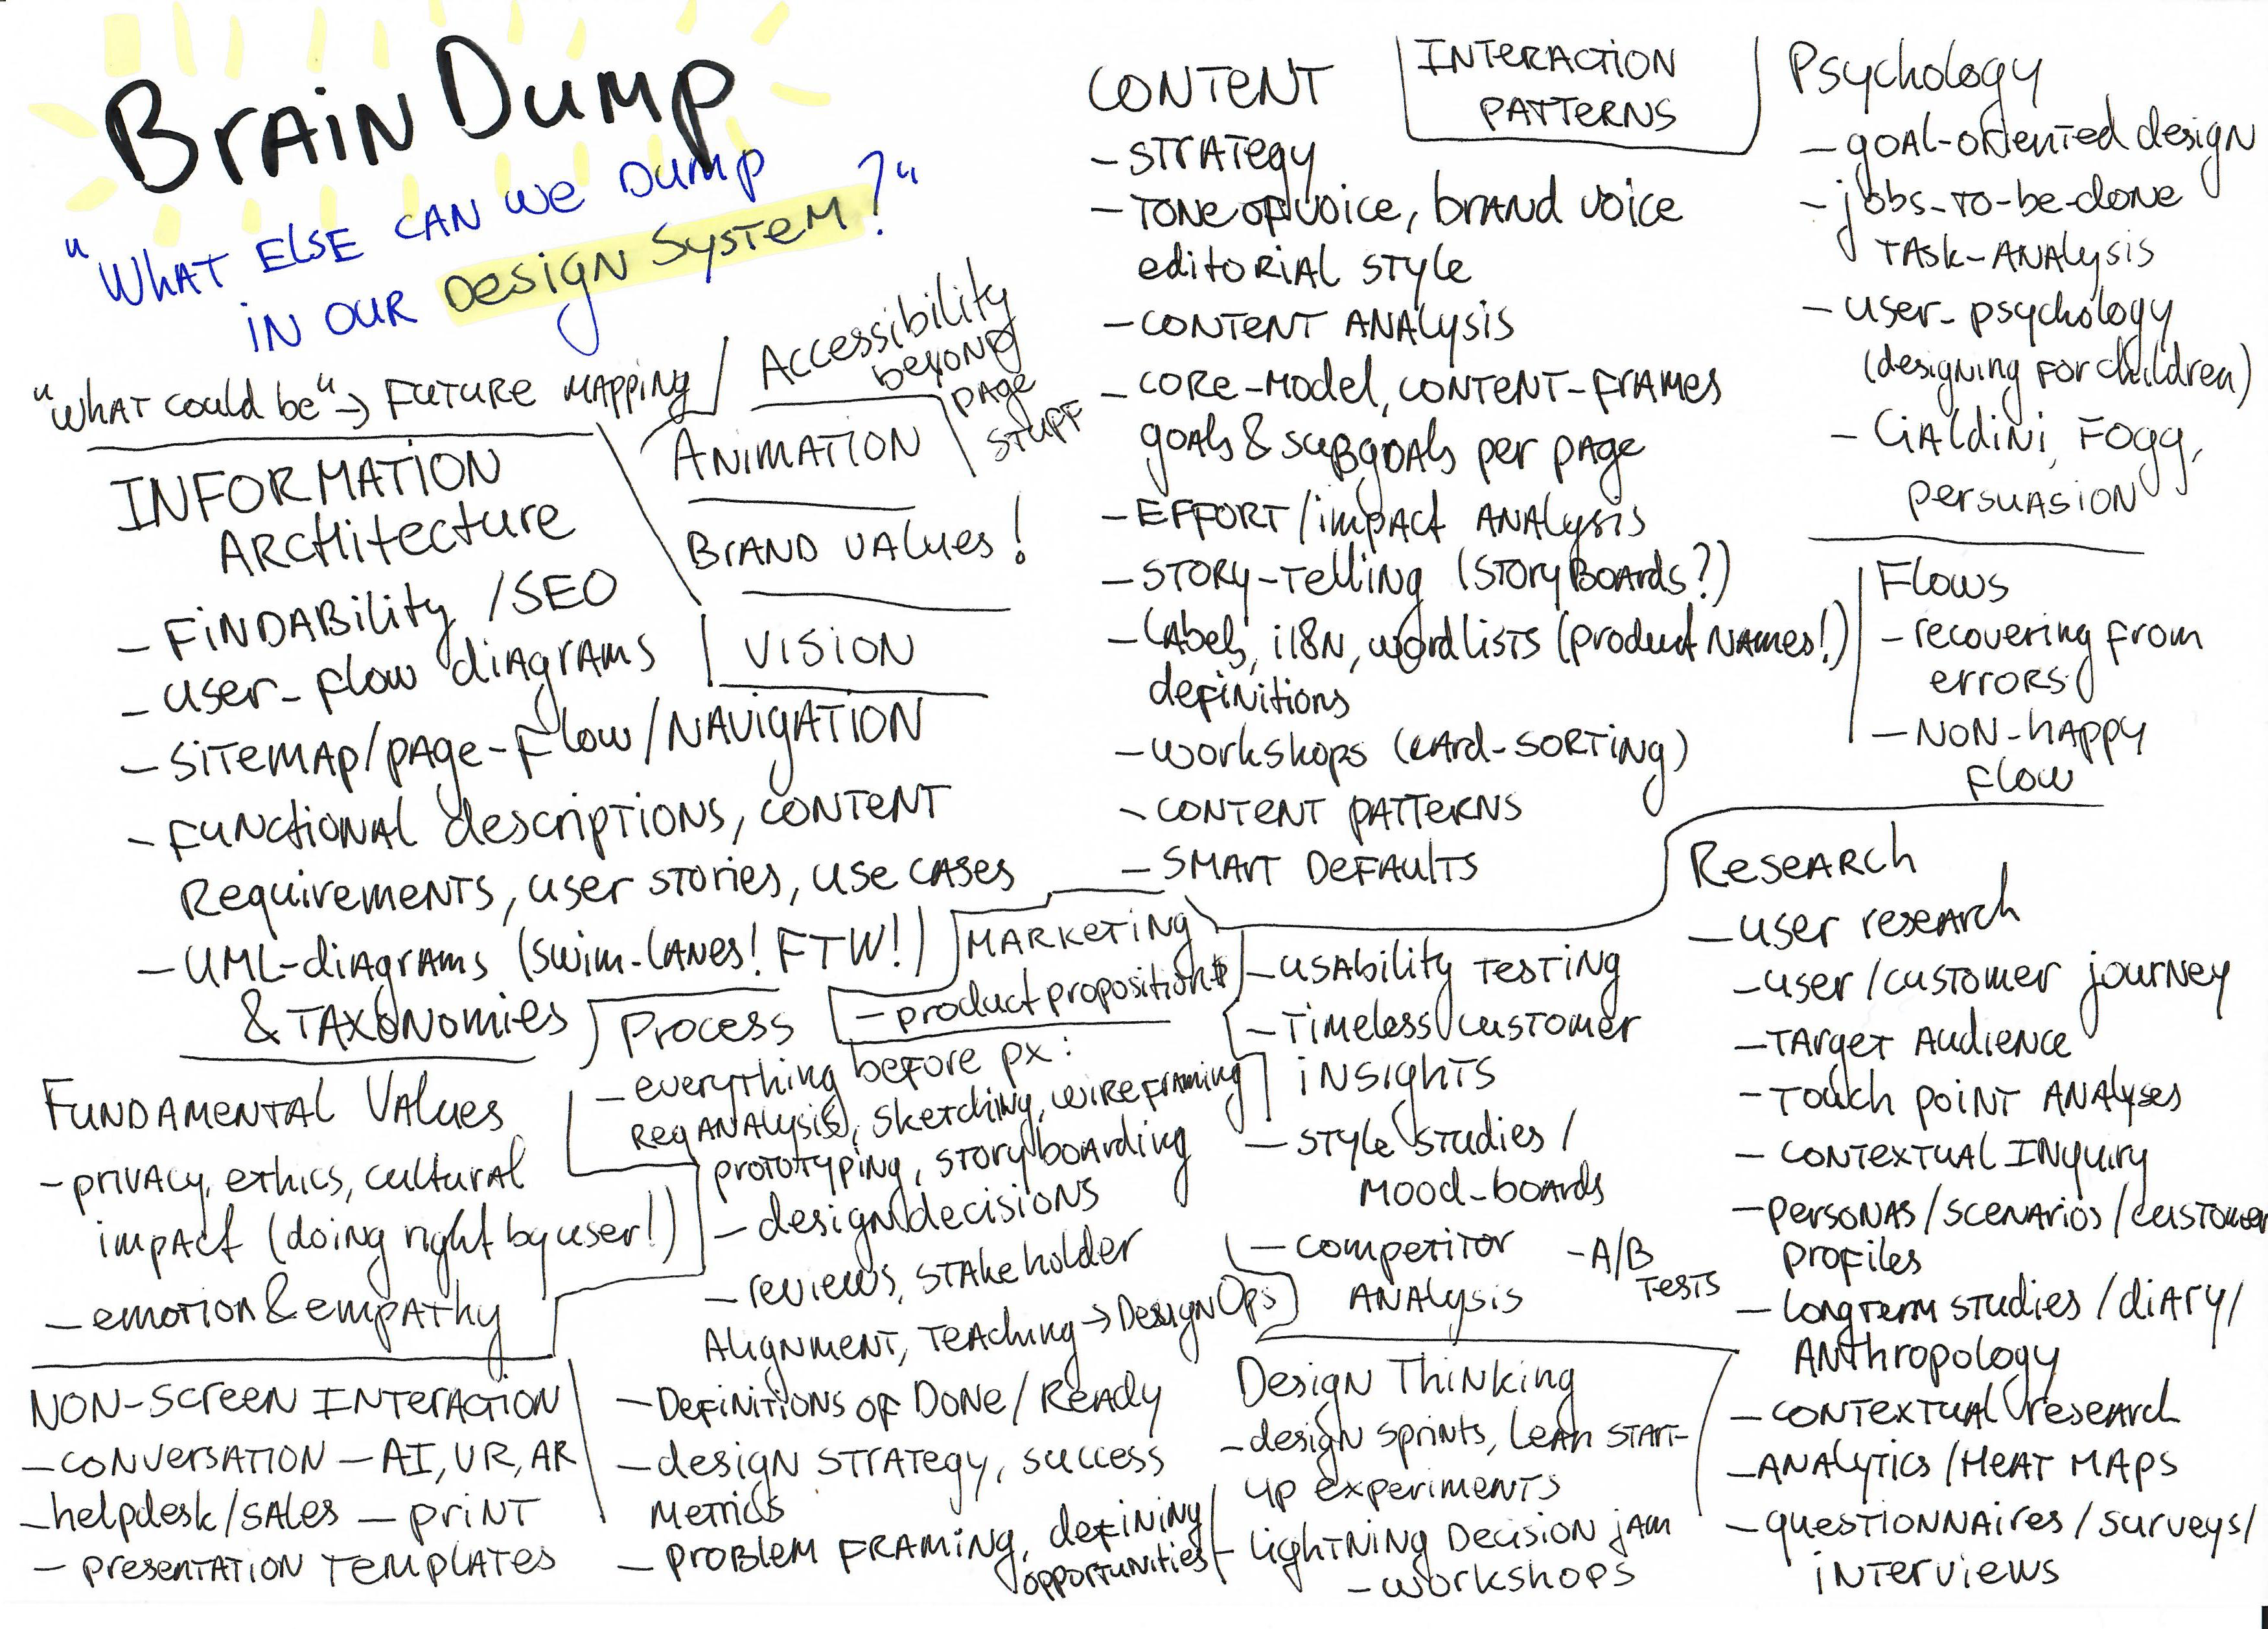 A scan of my brainstorm, showing lots of things that potentially could be added to a Design System